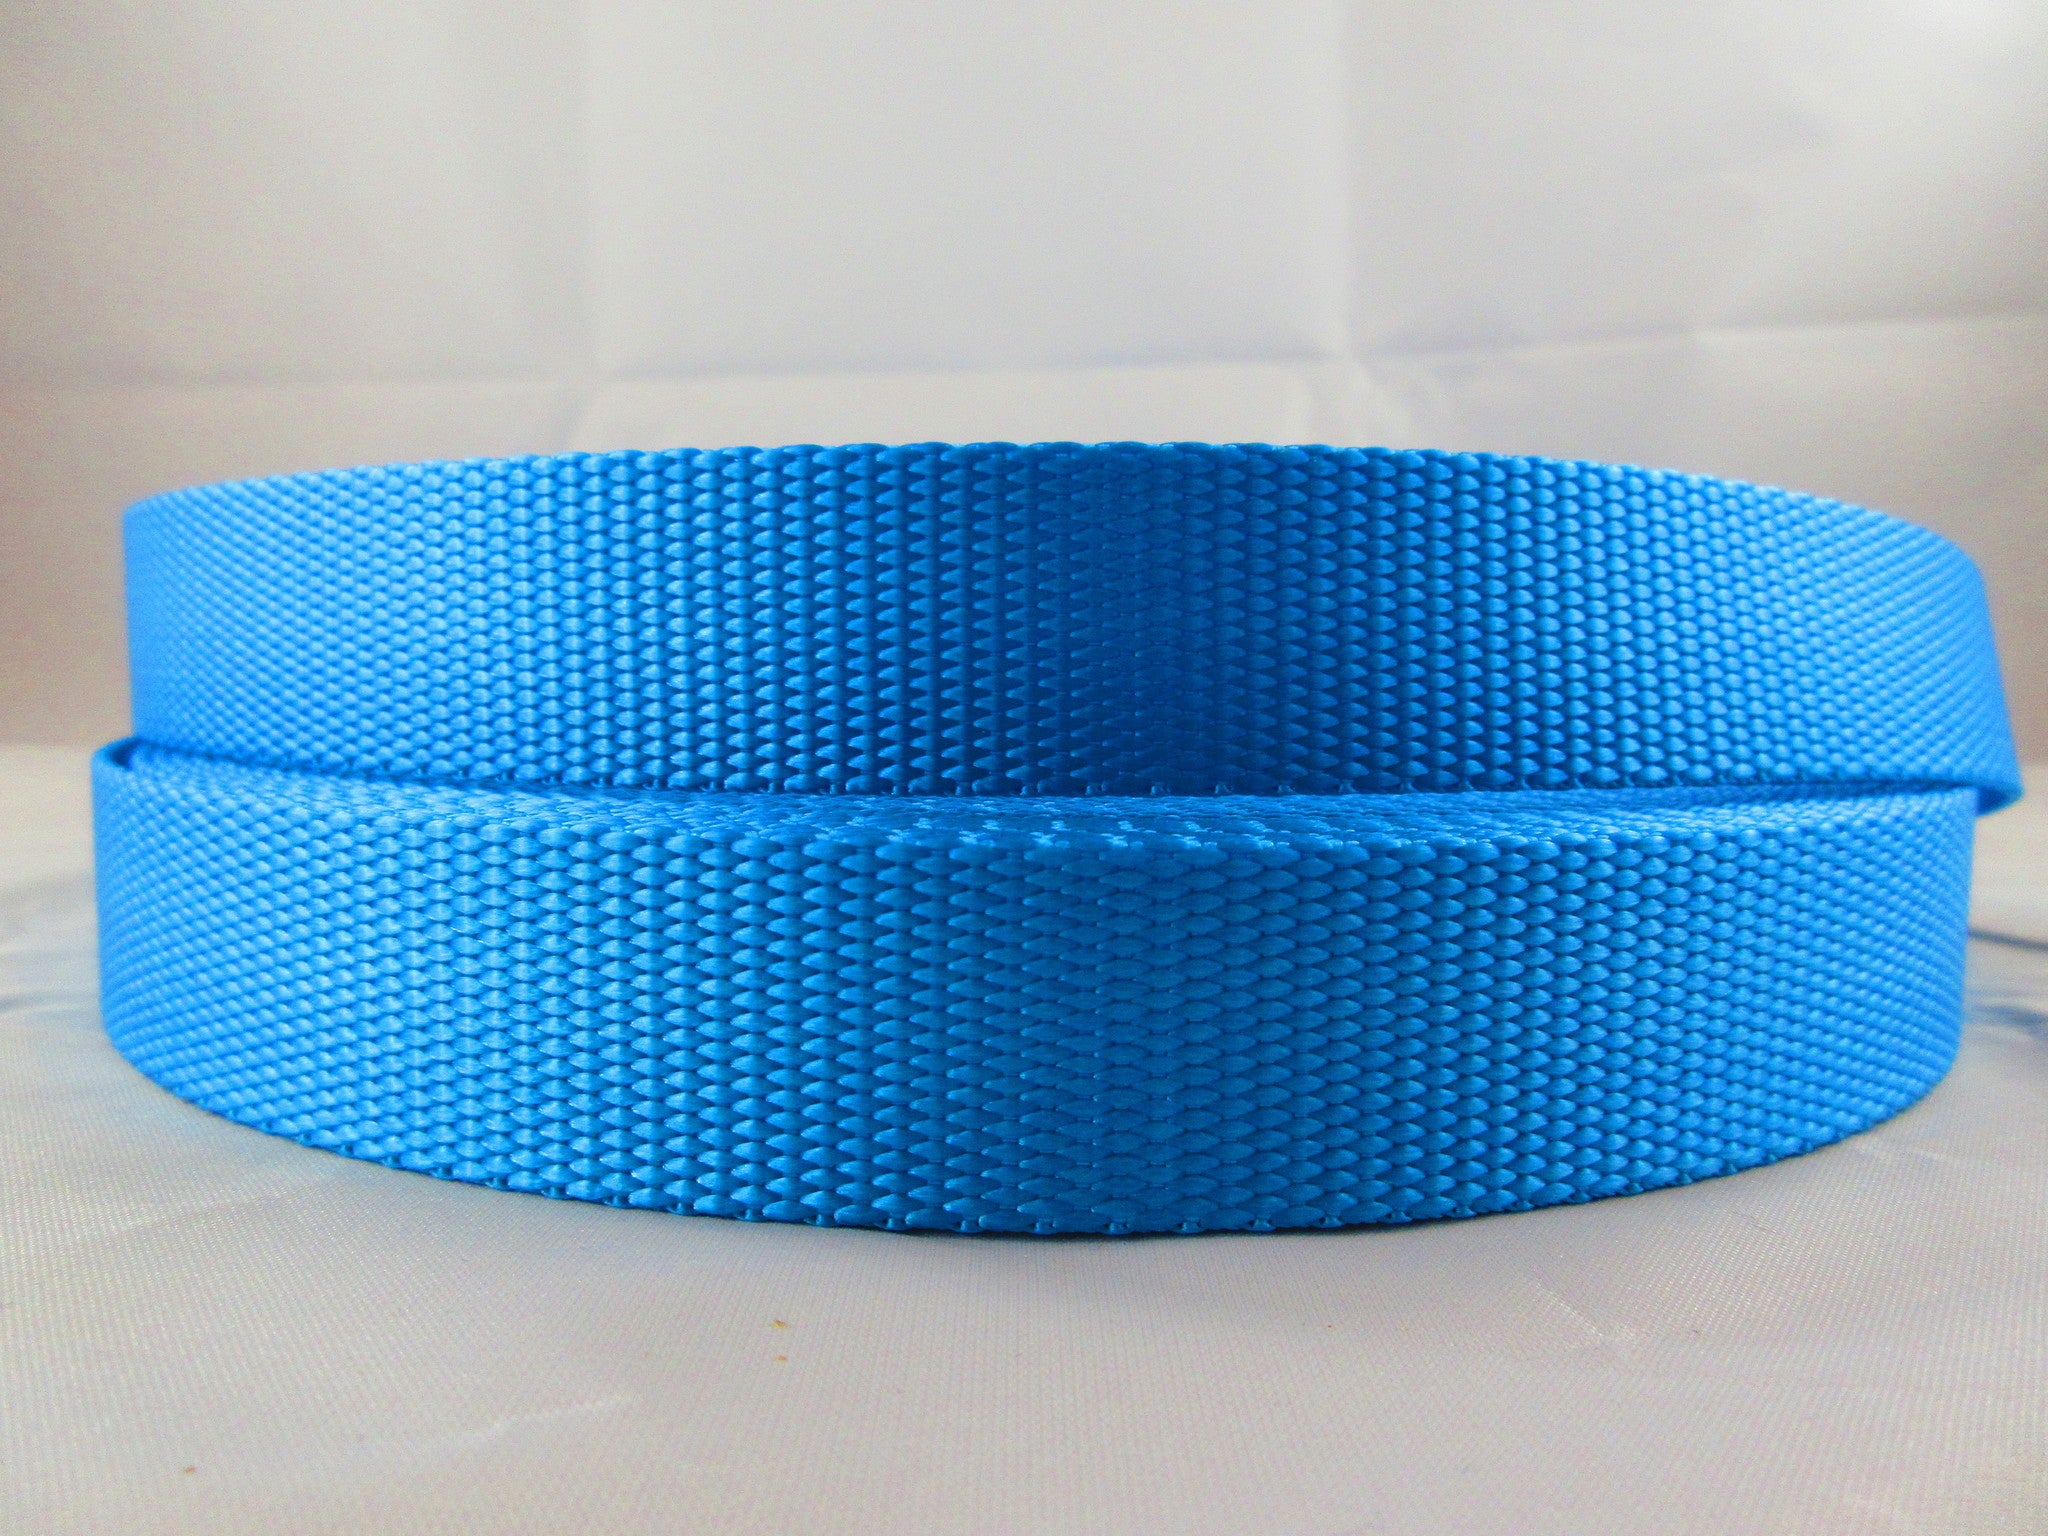 1" Ice Blue Nylon Dog Collar - Penny and Hoover's Pig Pen